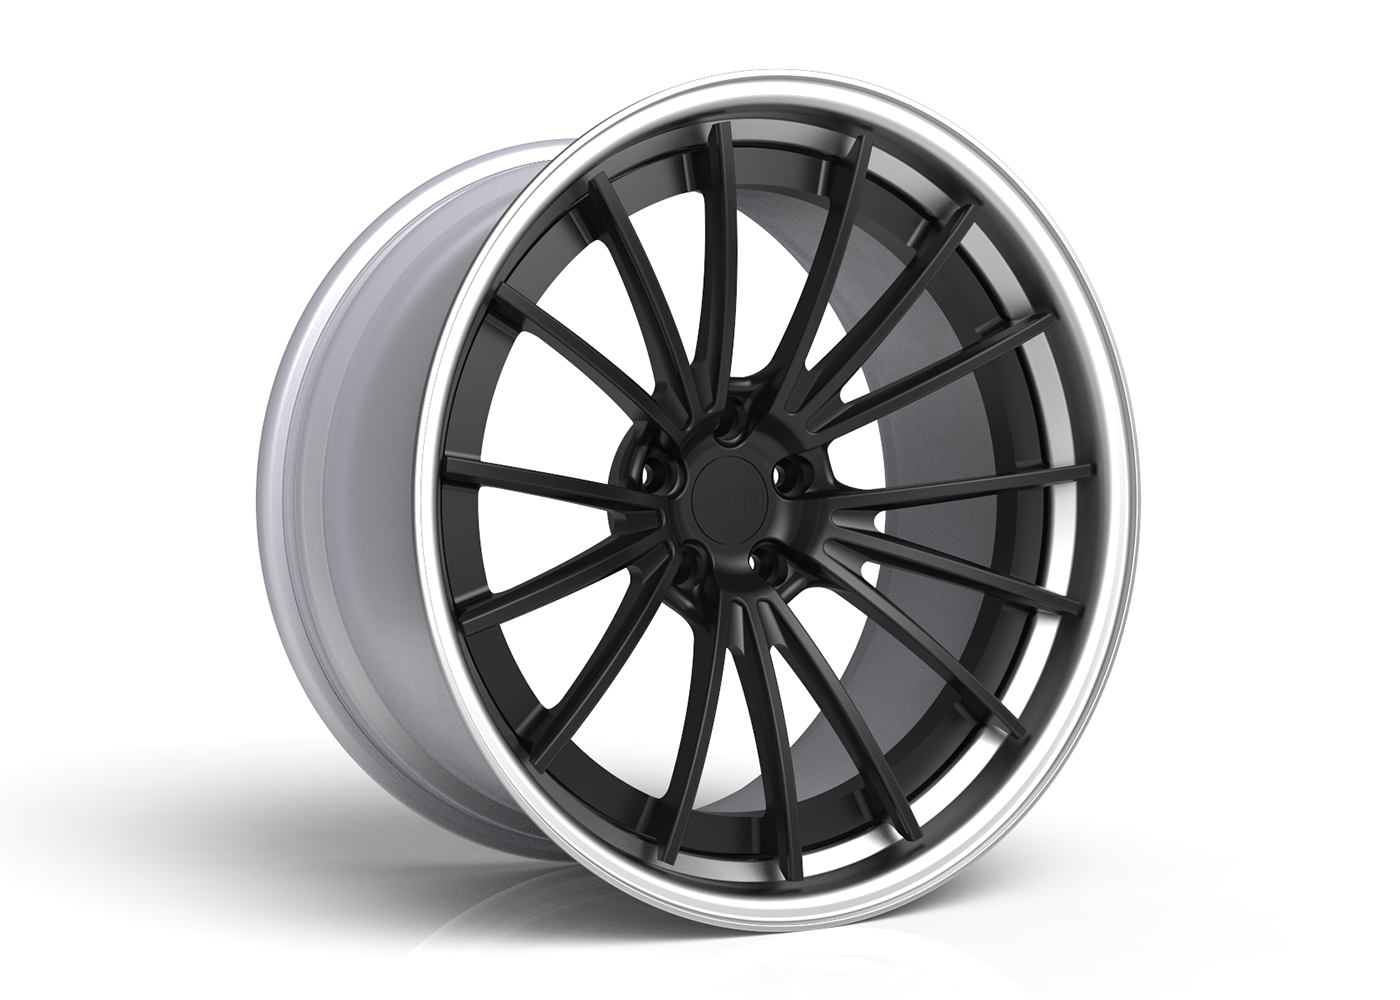 3SDM | Cast & Forged Alloy Wheel Brand 3.52fx2l Forged 3.52  